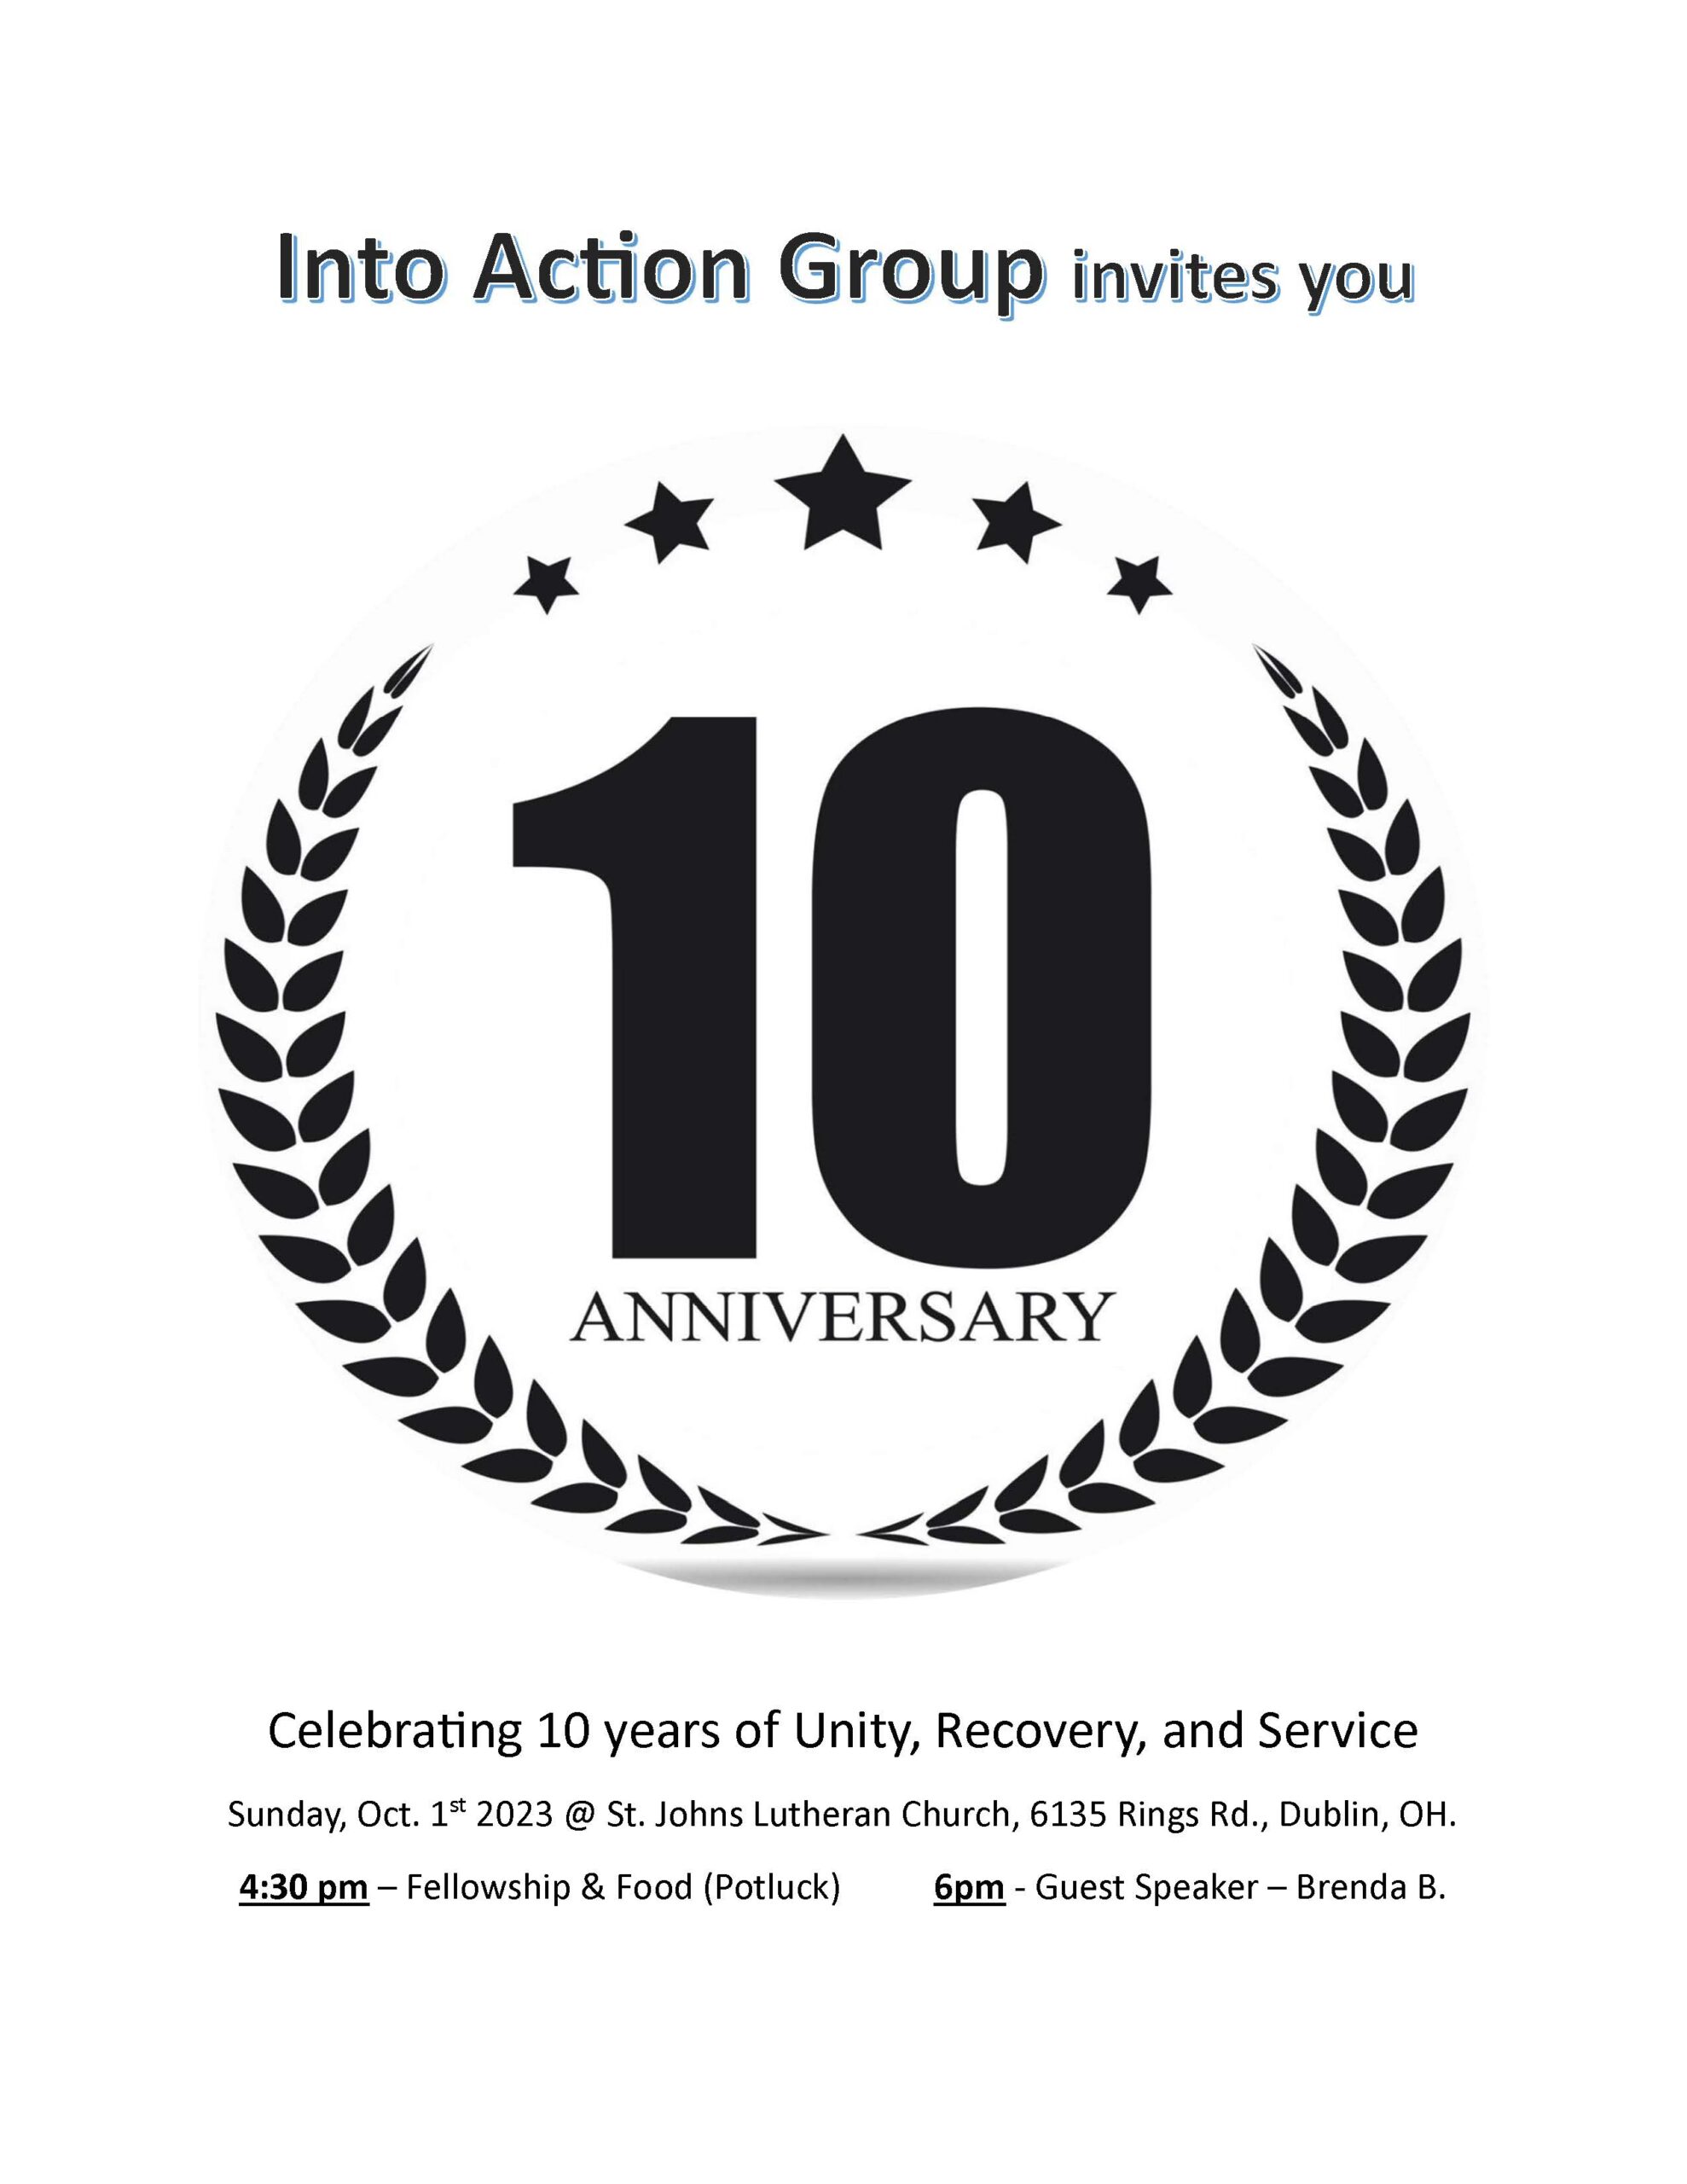 AA-IntoActionGroup-10th-Anniv